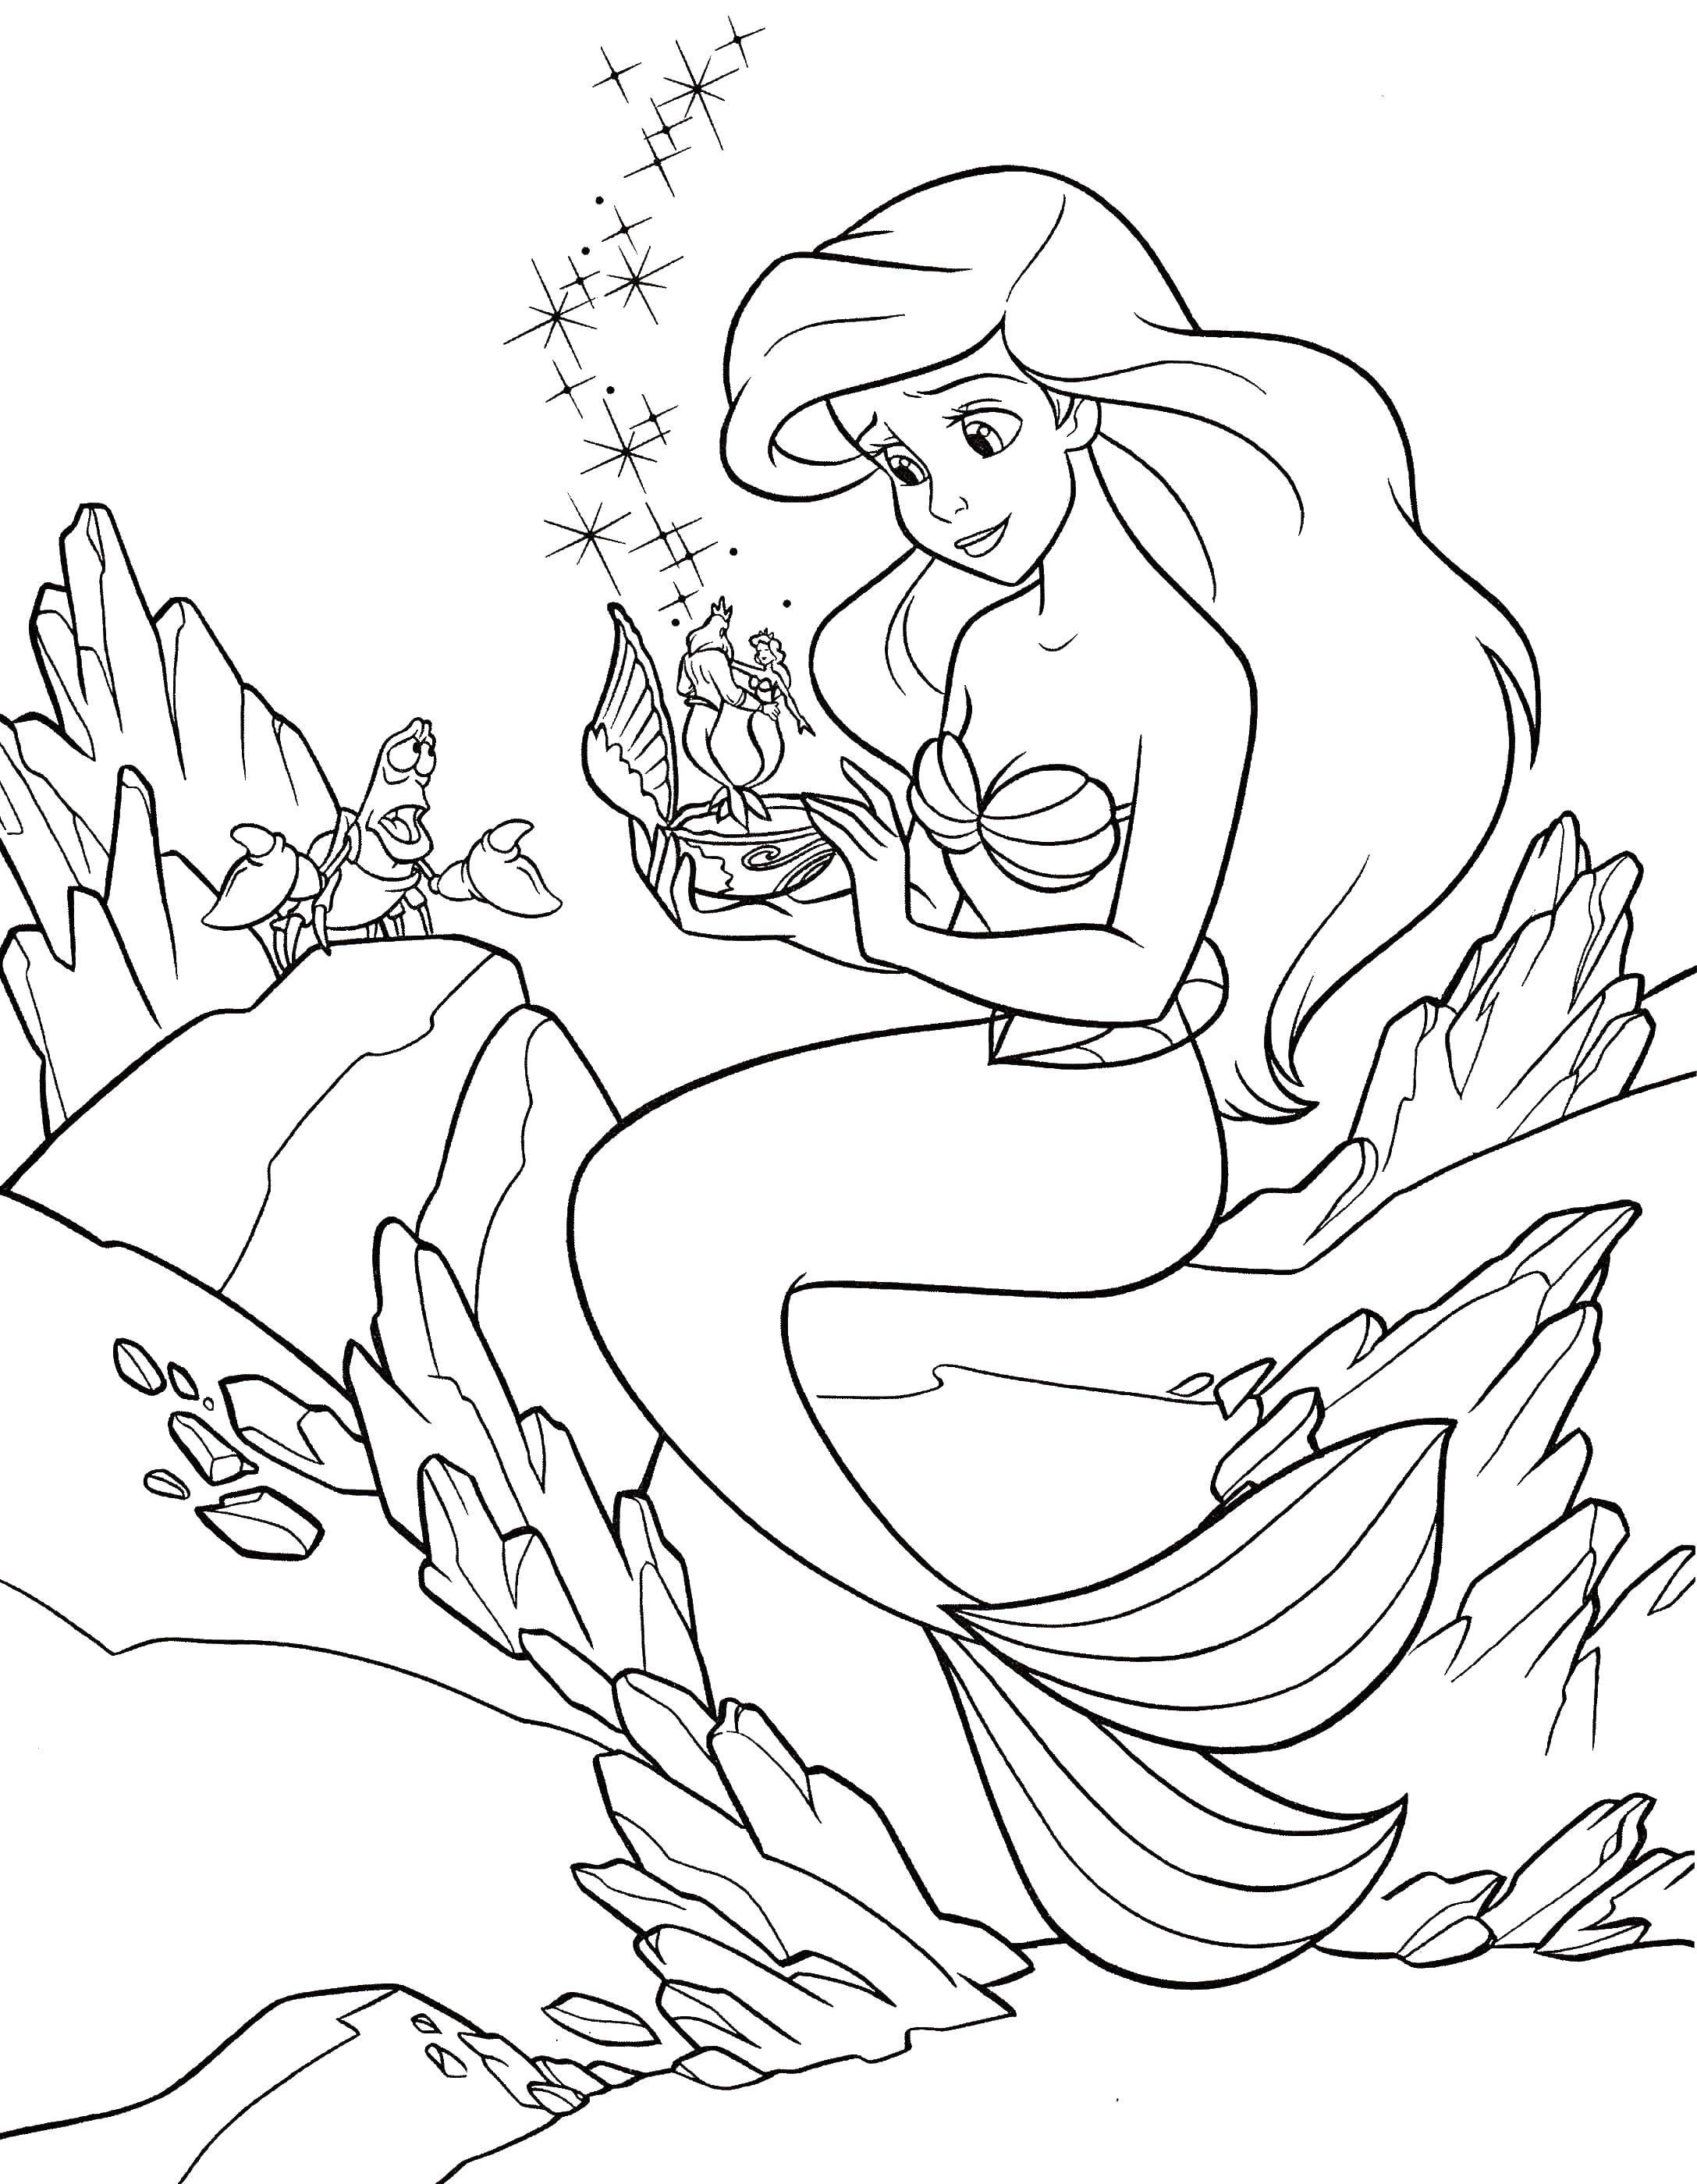 Coloring Mermaid and shell. Category The little mermaid. Tags:  mermaid, conch, crab.